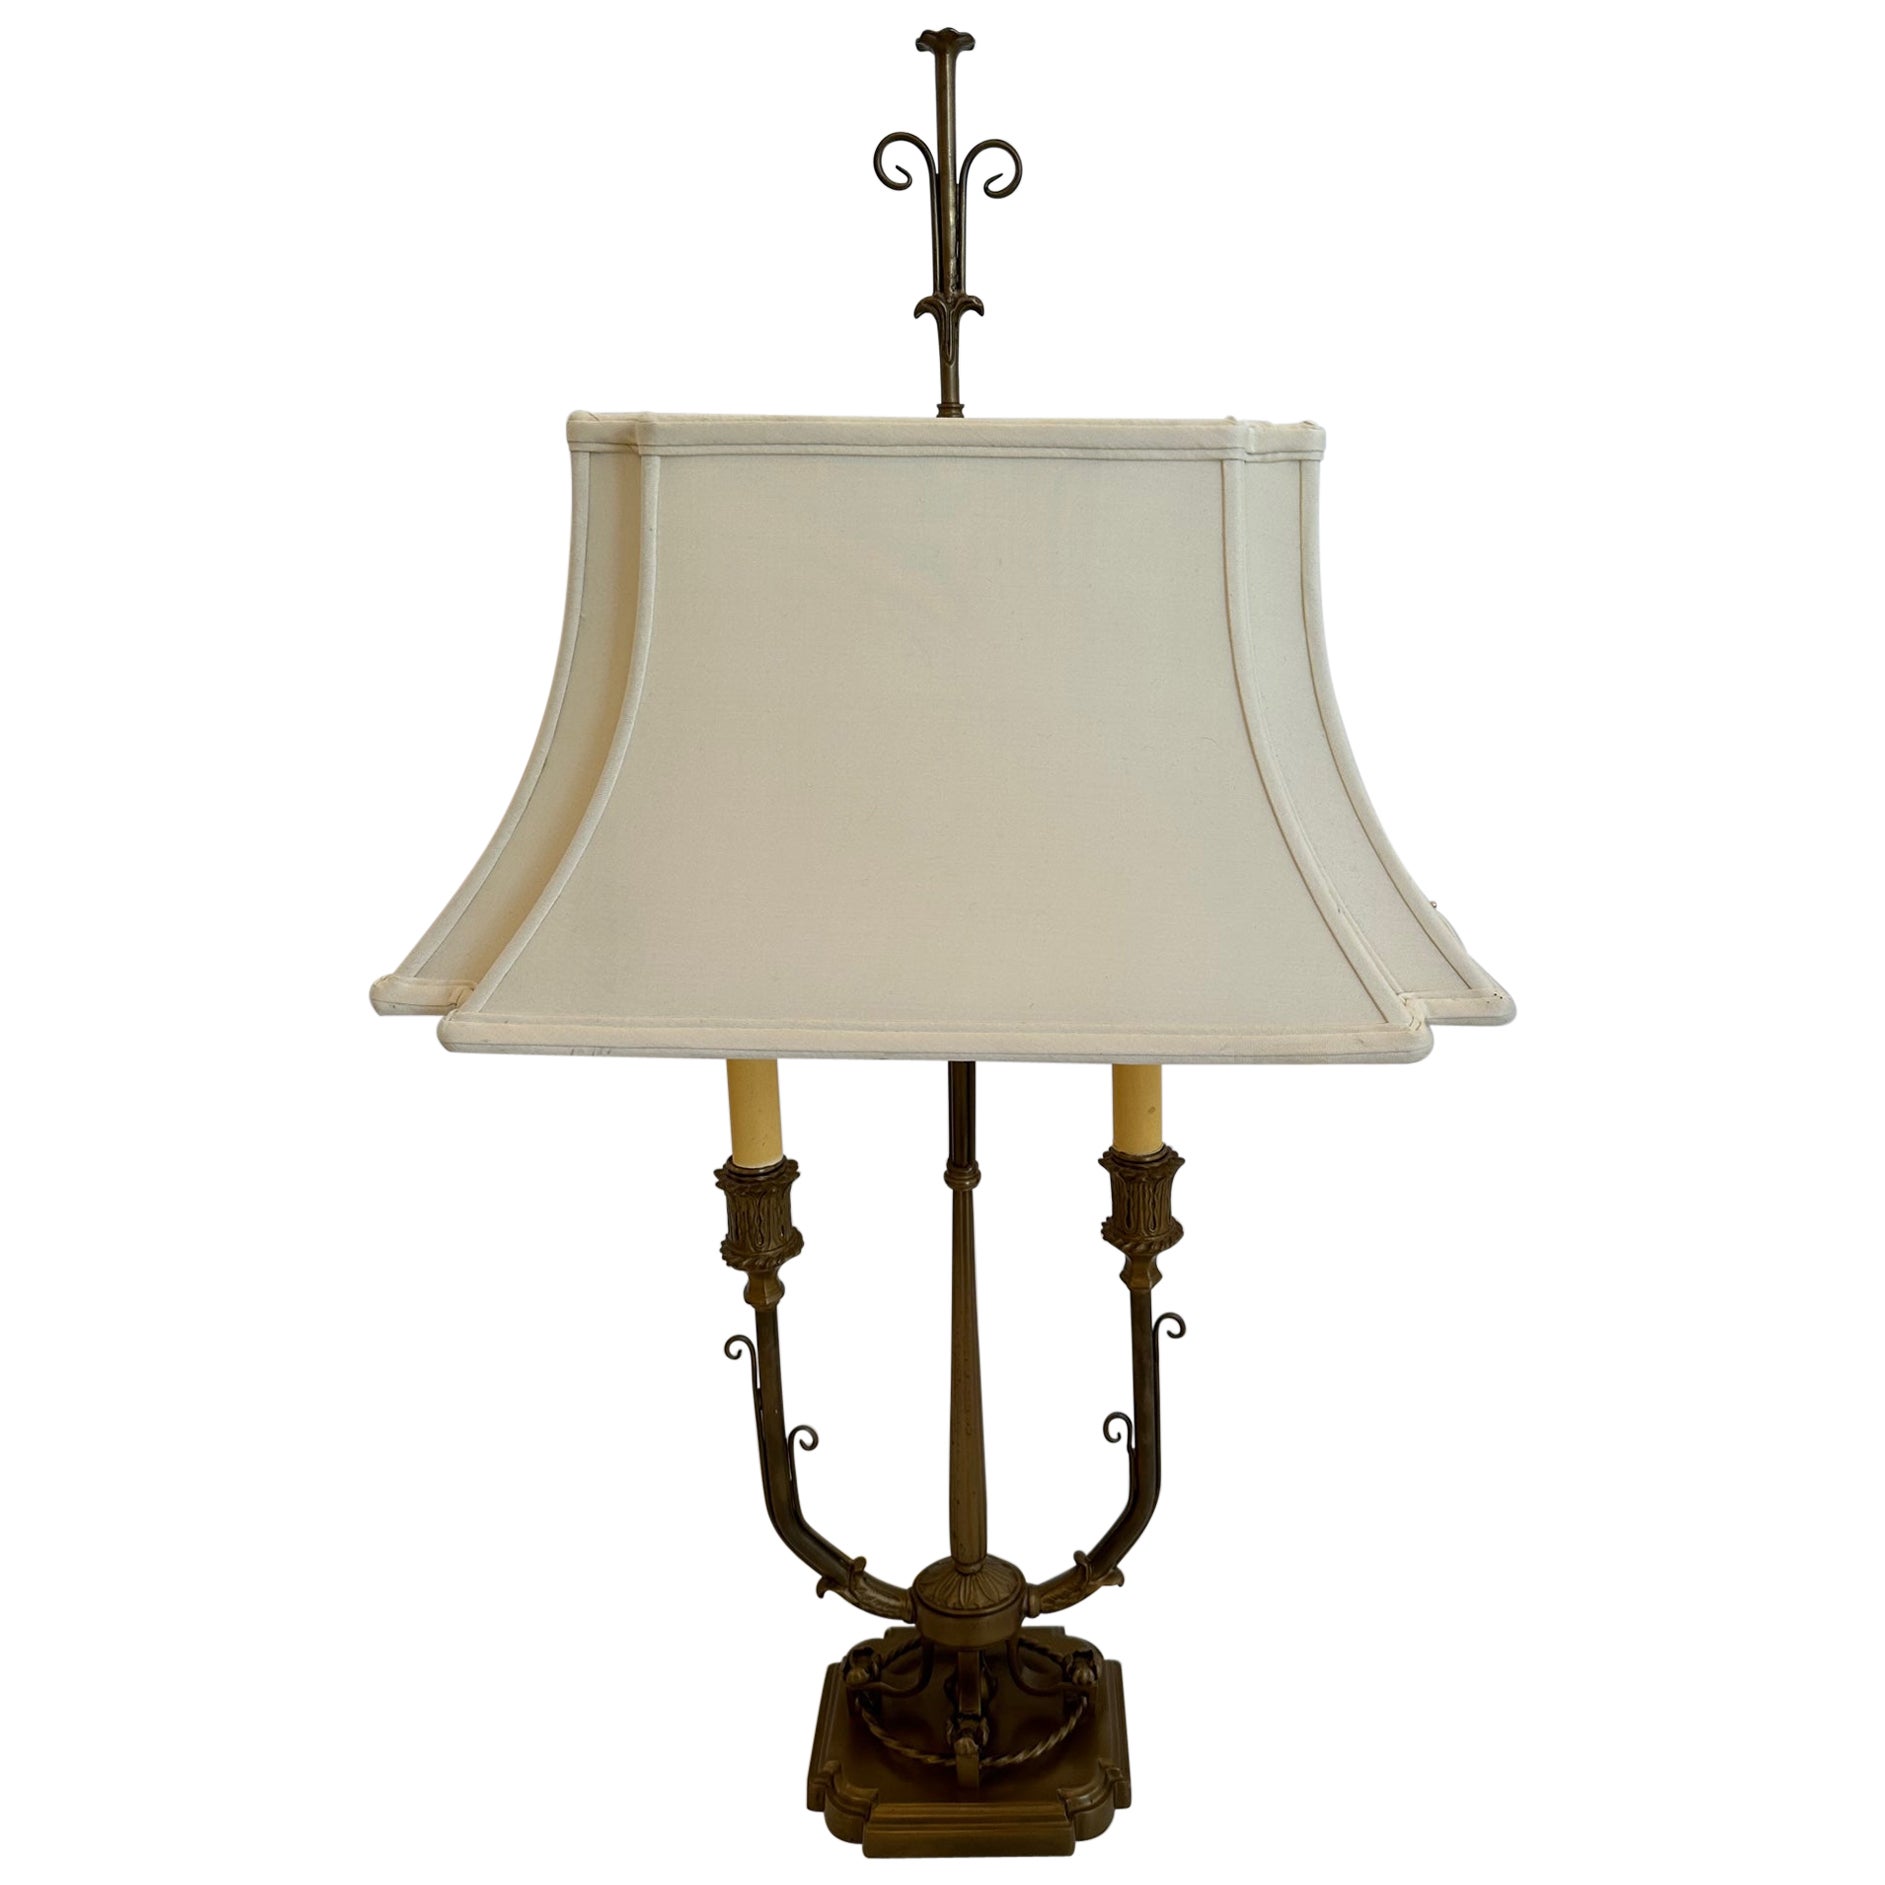 Vintage French Bouilette Lamp with Custom Shade For Sale